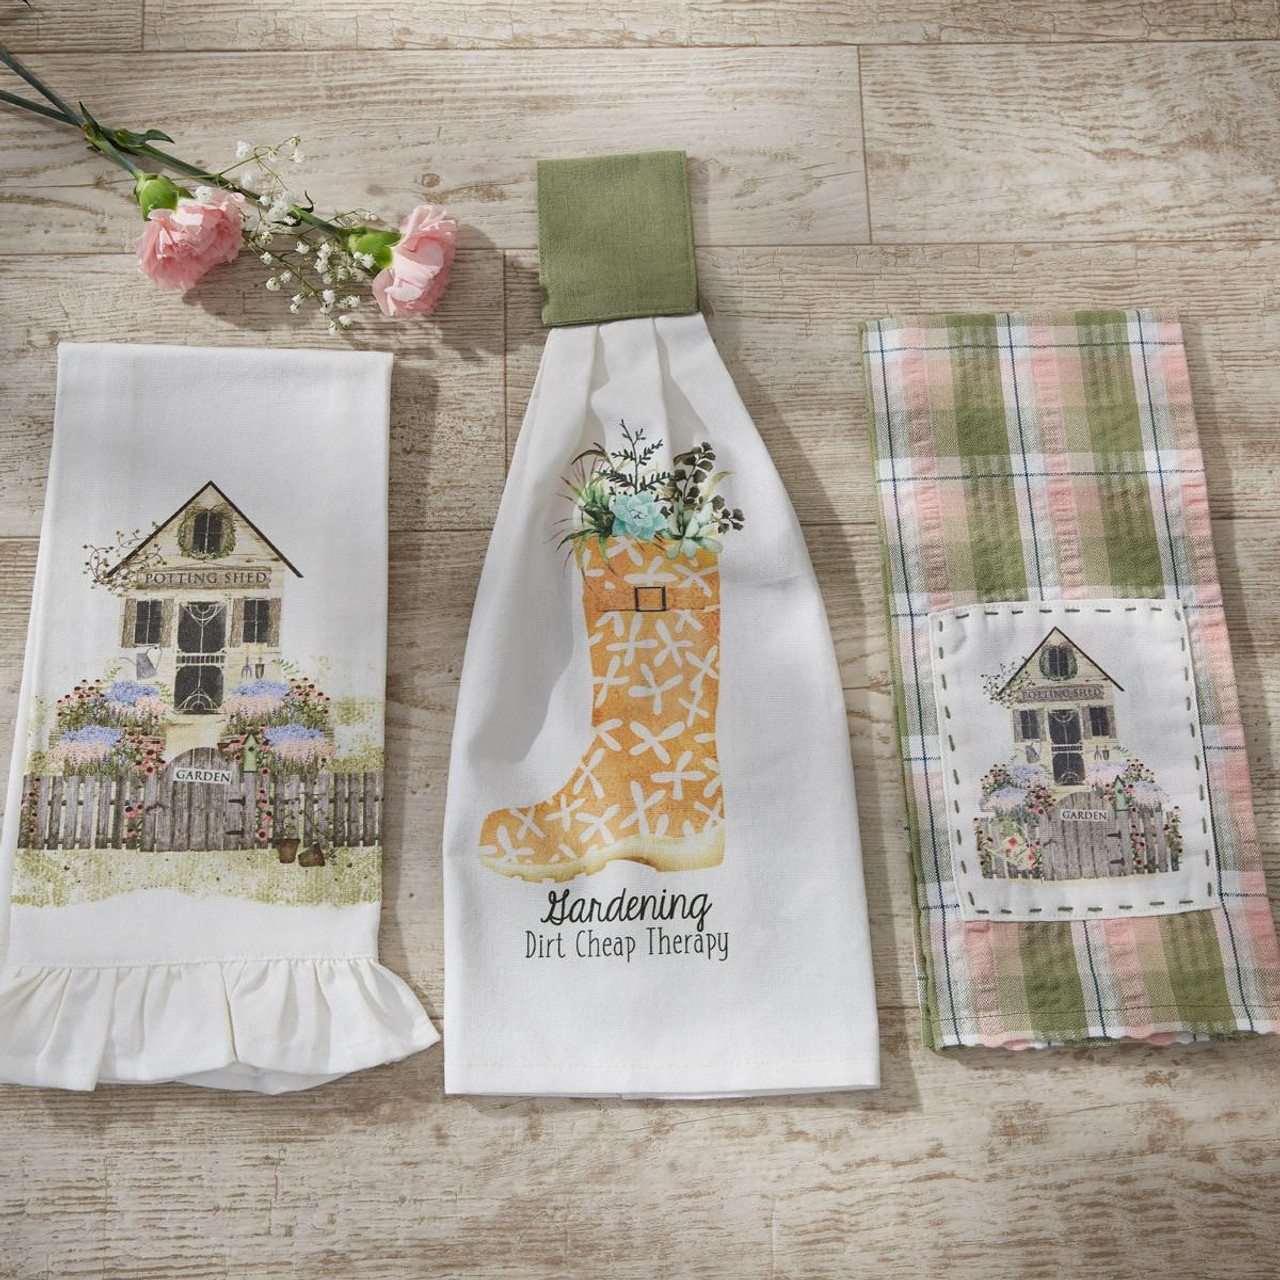 https://cdn11.bigcommerce.com/s-tfdhmk/images/stencil/1280x1280/products/22225/156510/Spring-Garden-Hand-Towels-Set-of-2-762242038776_image3__26564.1667564592.jpg?c=2